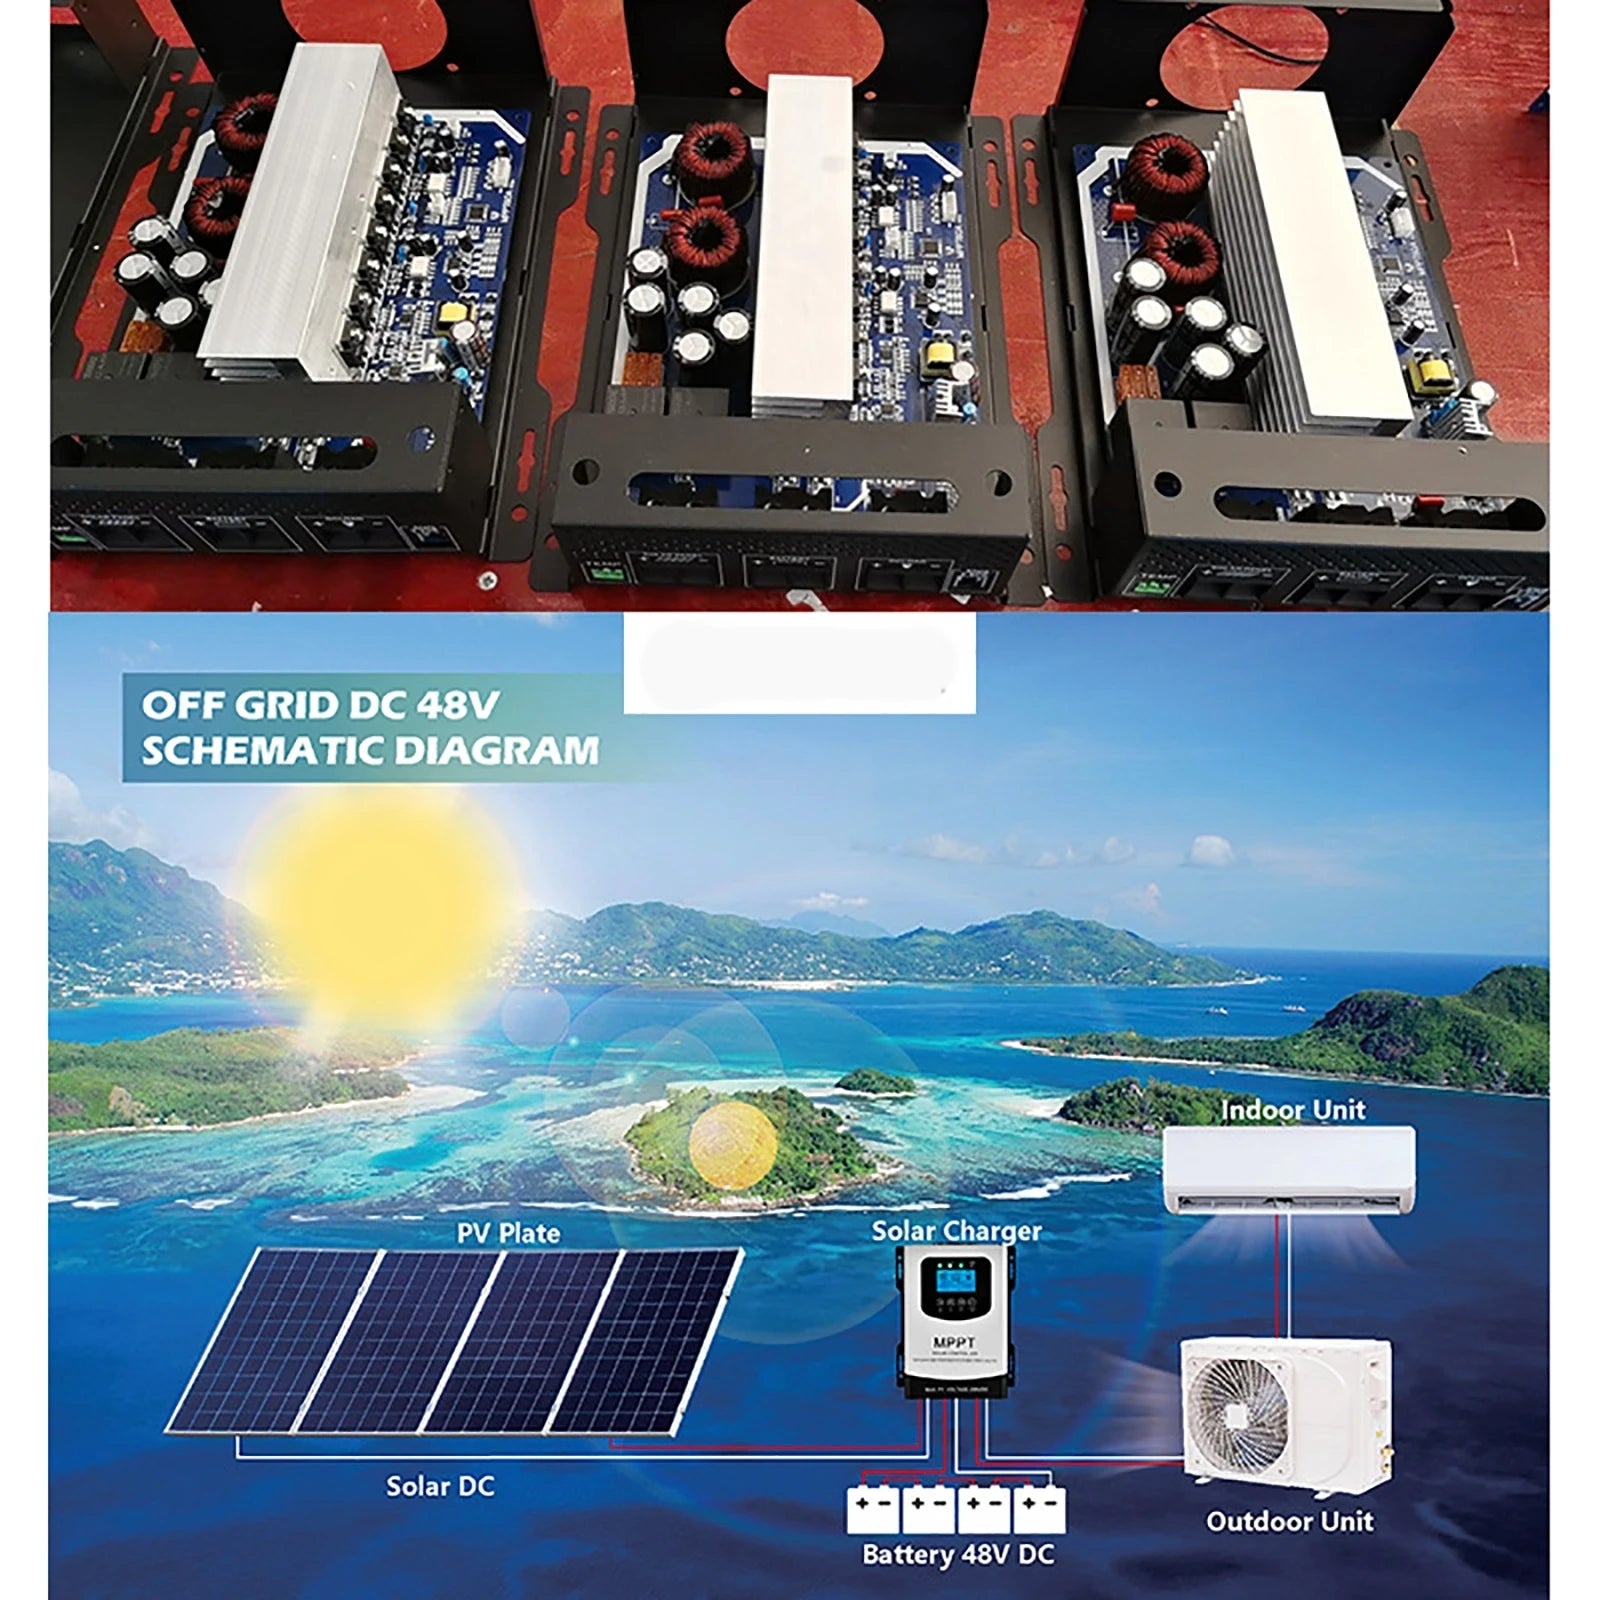 50A 60A MPPT Solar Charge Controller, Off-grid power system with solar charging and battery integration for indoor/outdoor use.